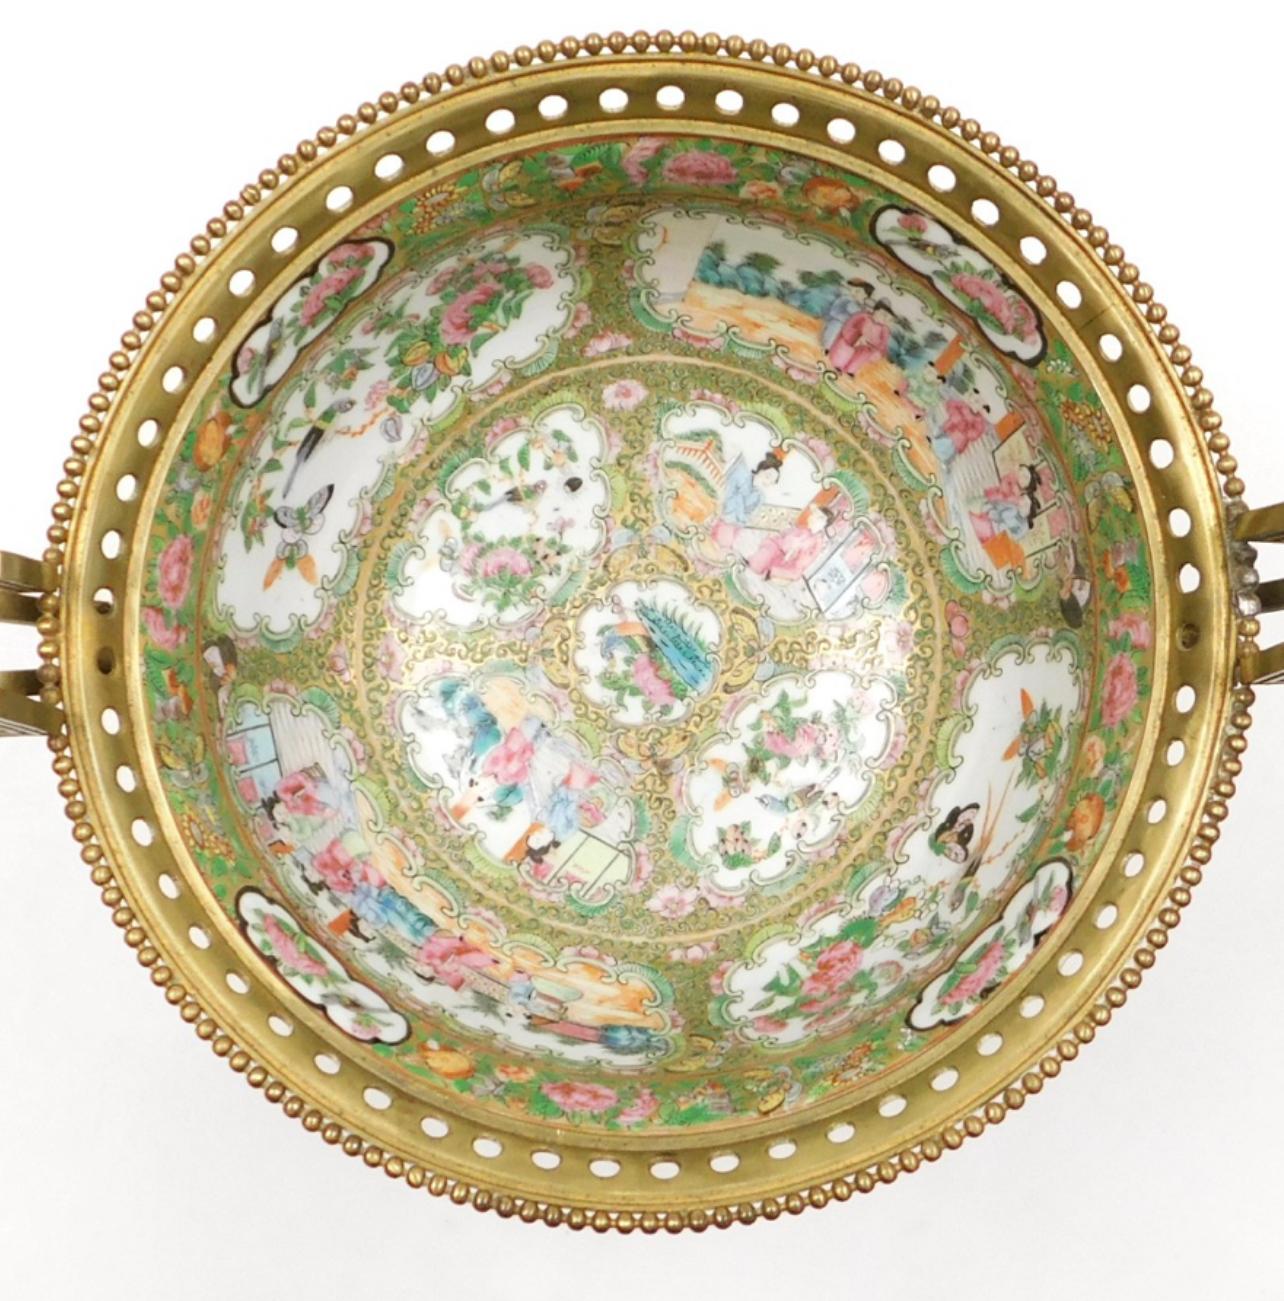 A Large 19th C Cantonese famille rose porcelain and ormolu mounted bowl. For Sale 4